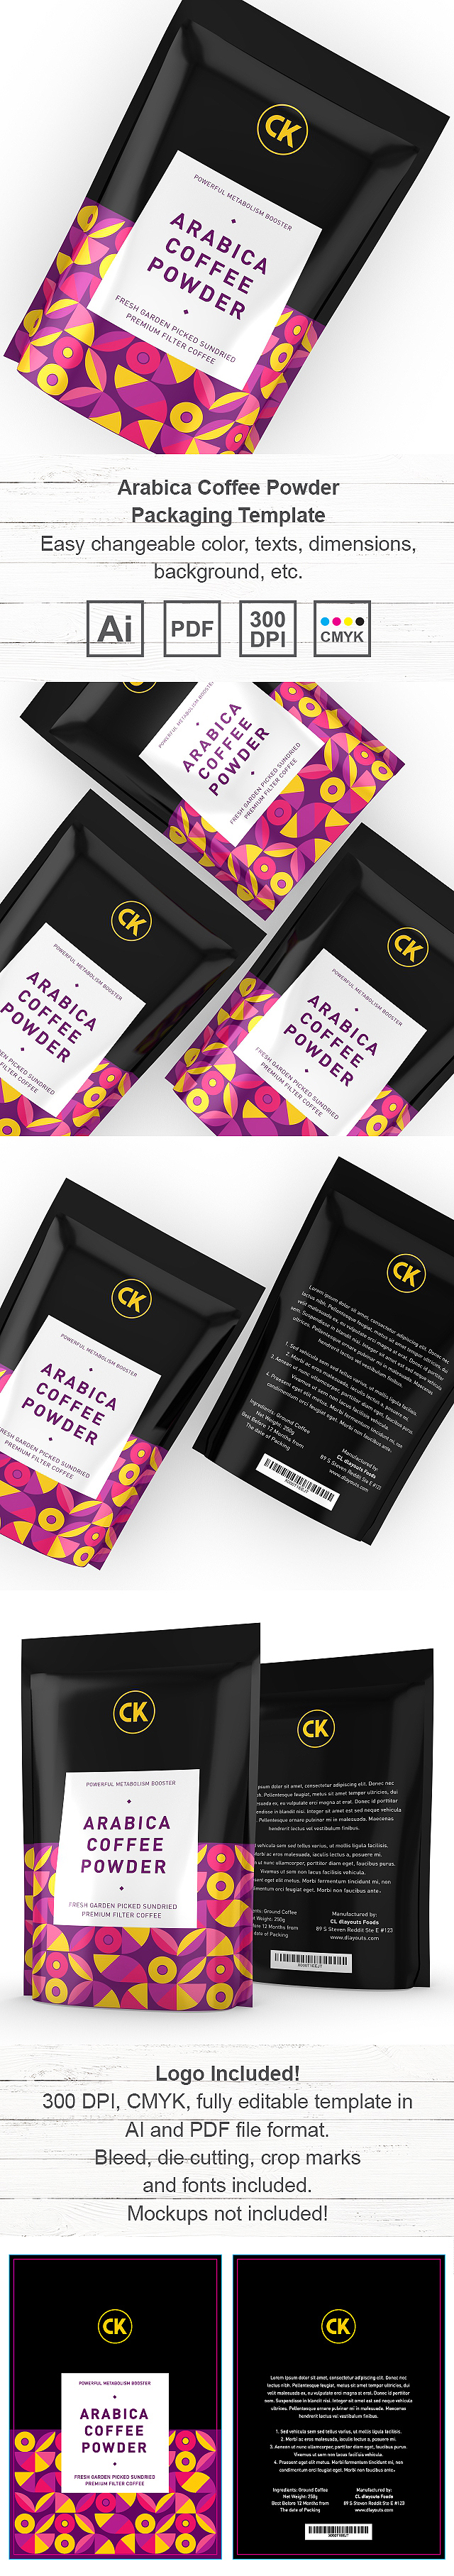 Arabica Filtered Coffee Powder Packaging Template